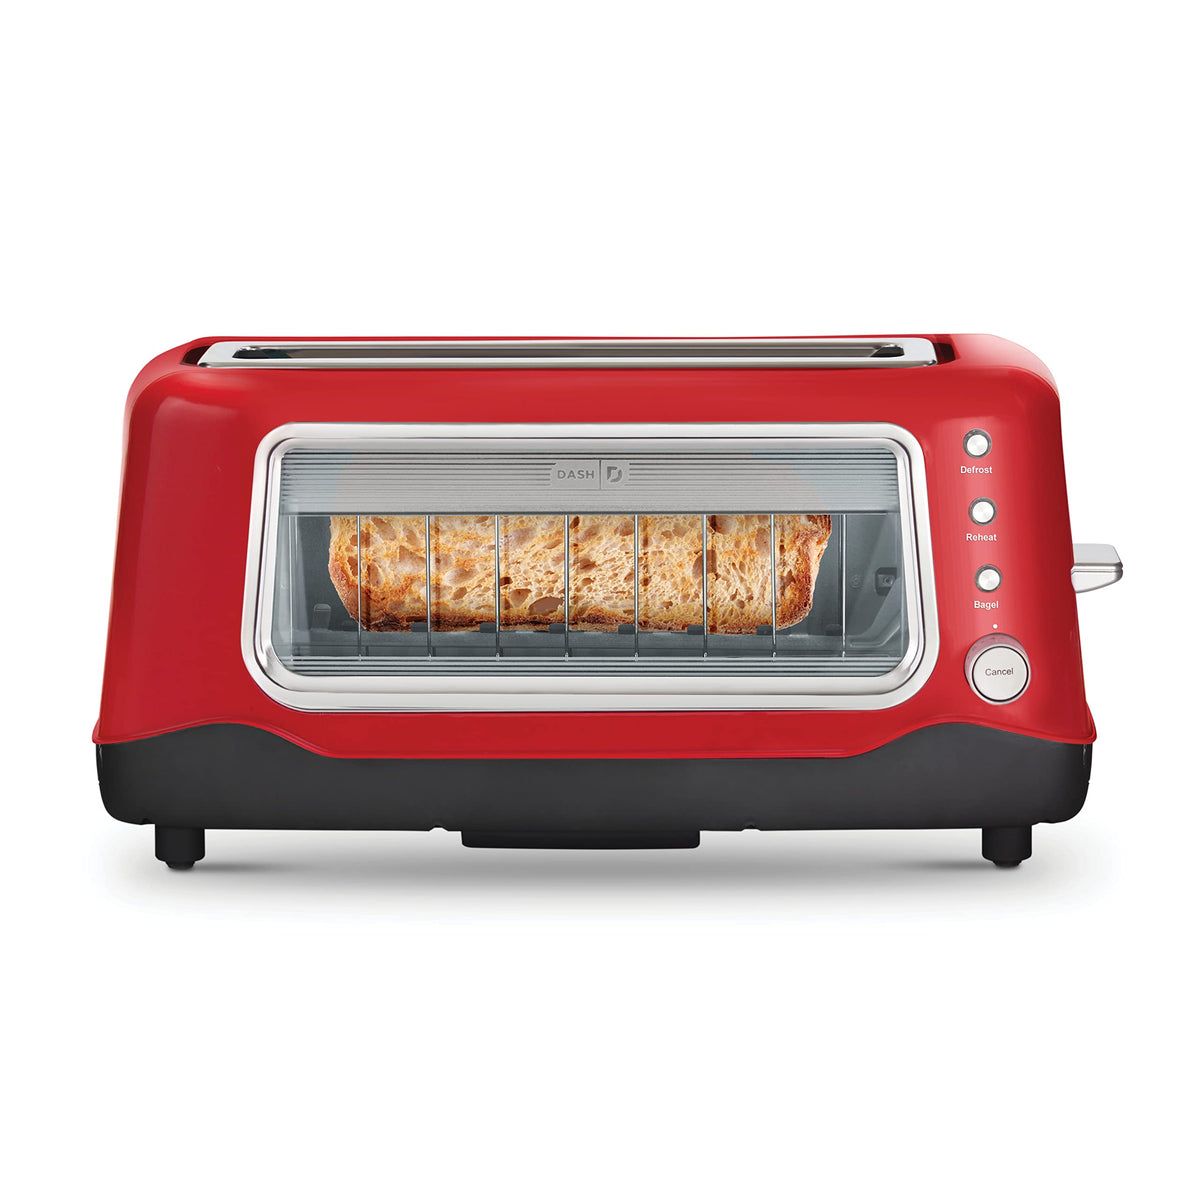 Dash Pop Up Bread Toaster (Red) with Wide Slot for any bread- Sourdough, Multigrain, Bagel | 7 Browning Levels with Defrost & Reheat, Removable Crumb Tray | inc. 1 year WARRANTY | 1100 W